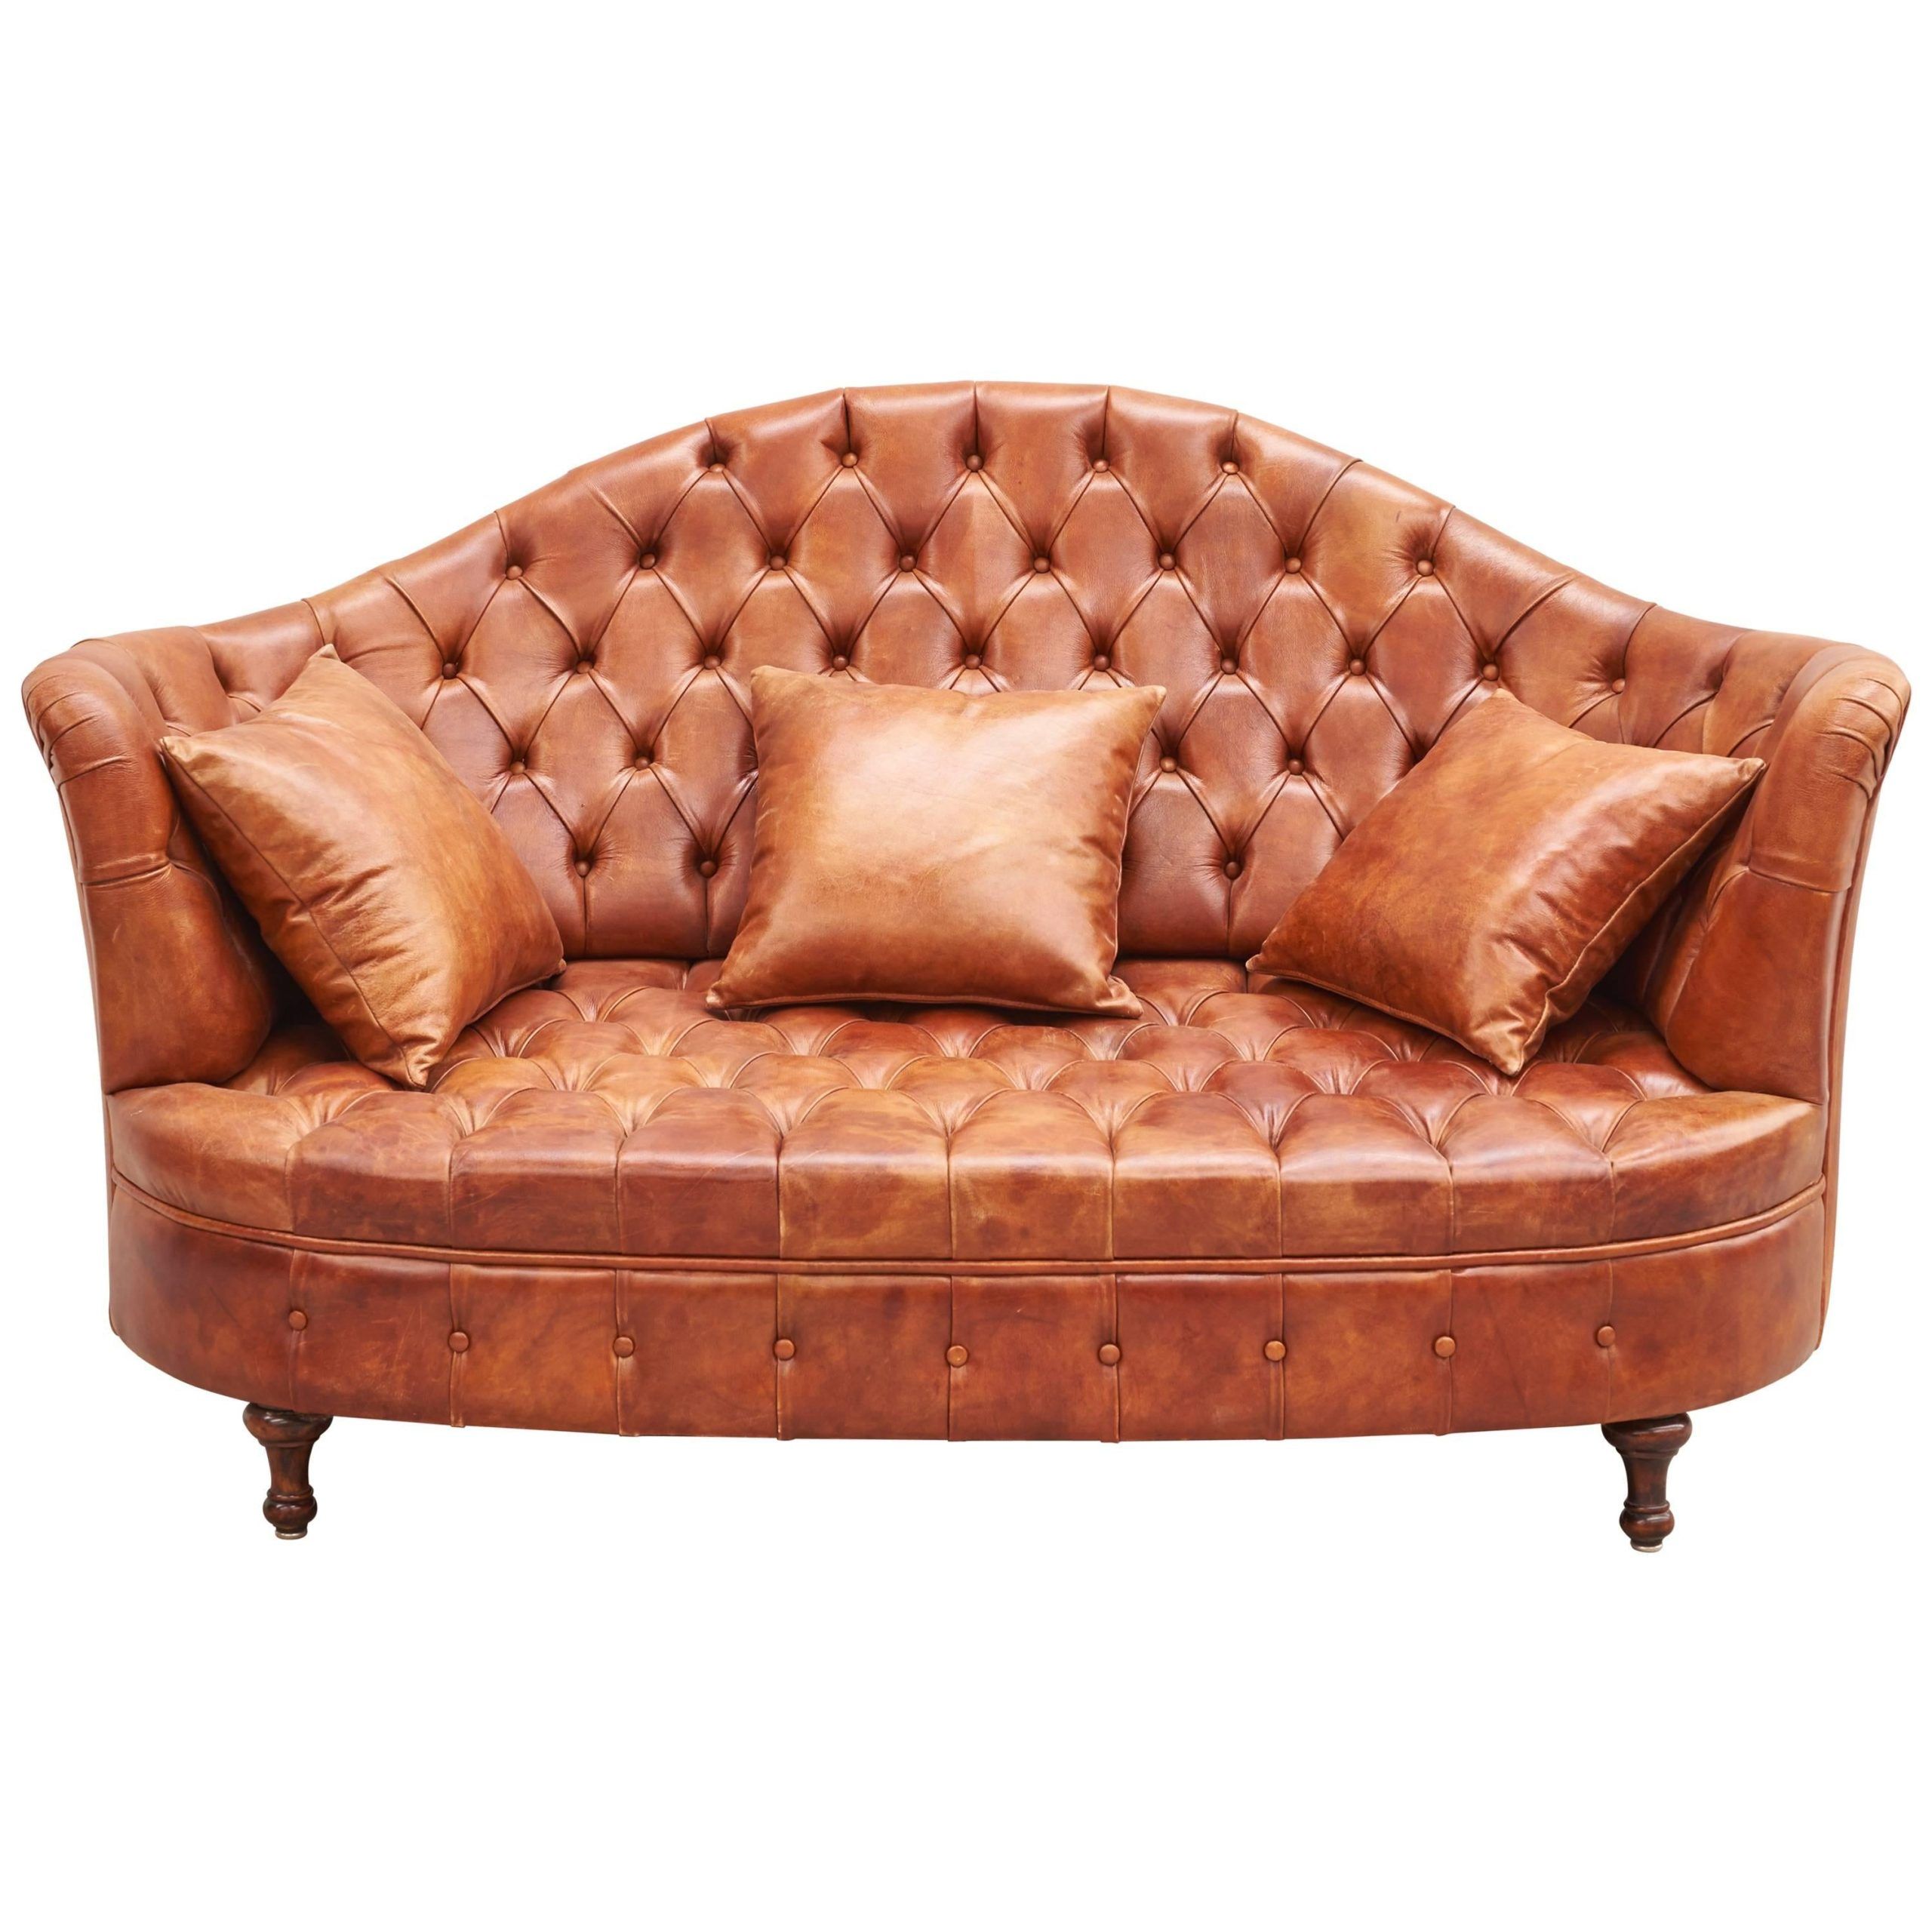 Burgundy Leather Chesterfield Sofa At 1stdibs | Burgundy Chesterfield For Chesterfield Sofas (Gallery 11 of 21)